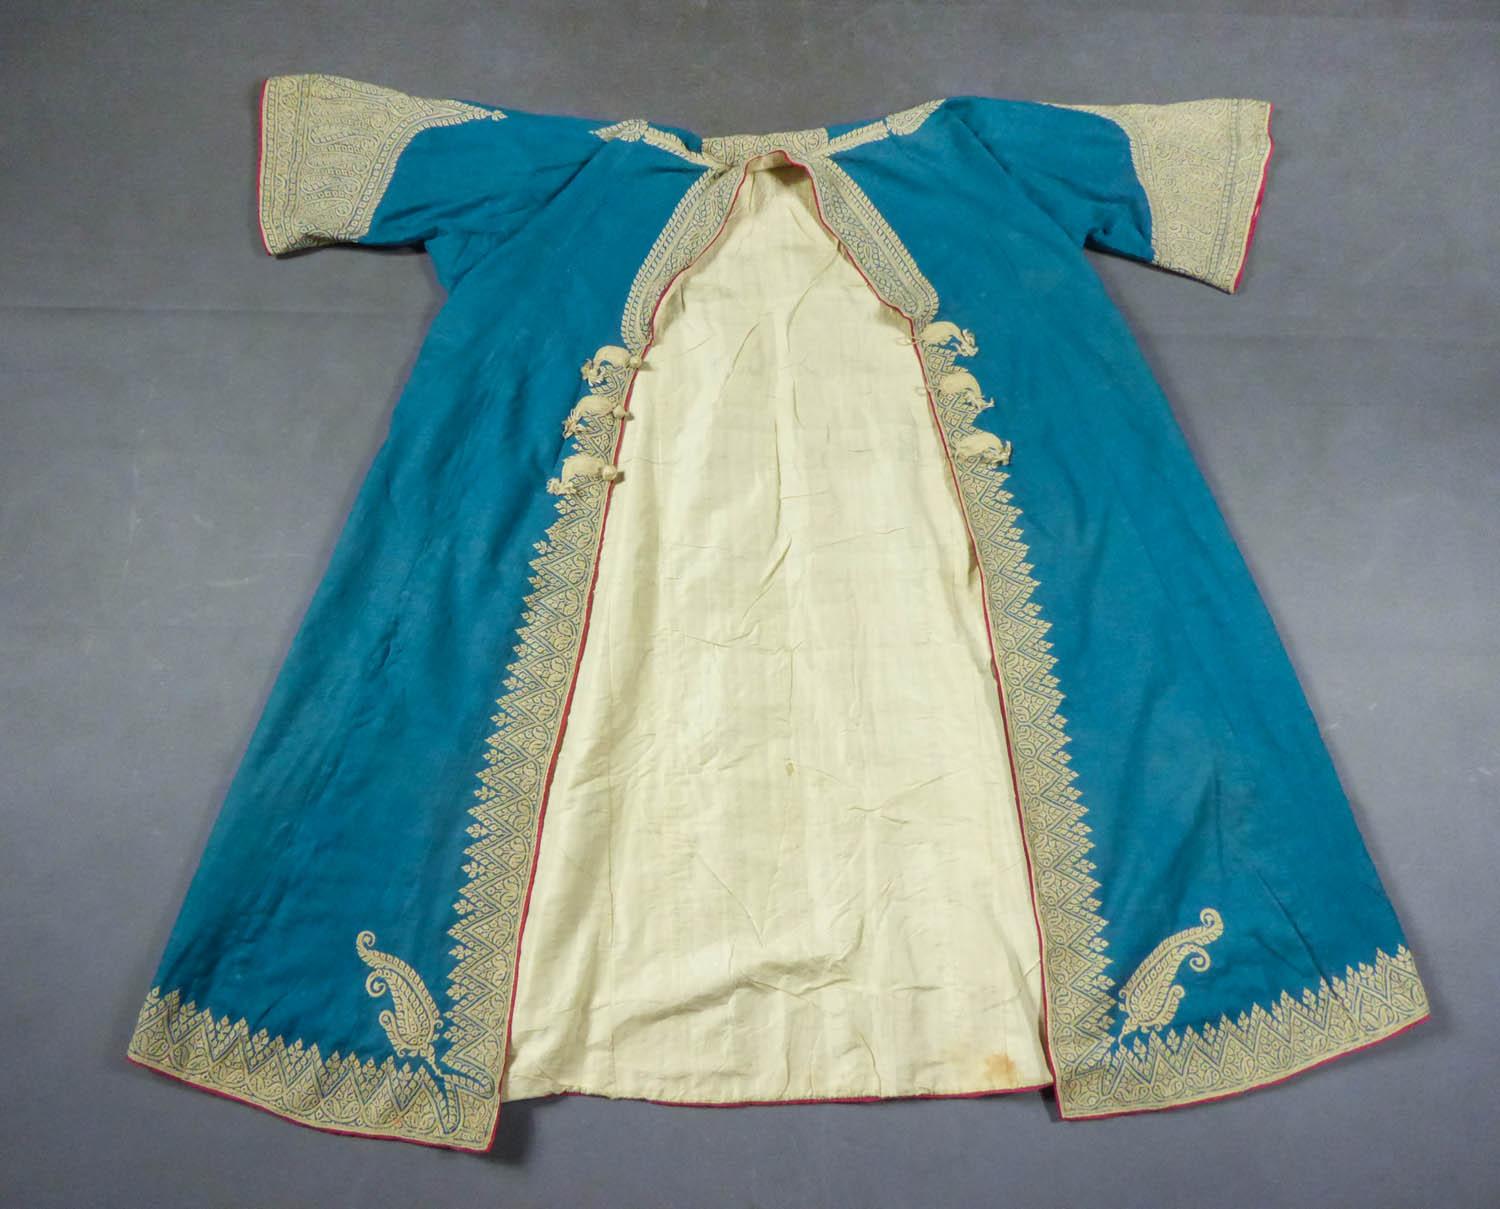 Second half of the 19th century
India Punjab

Male coat of Indian dignitary called Choga and native of the Punjab region (Amristar) from the late nineteenth century. Very fine turquoise pashmina densely embroidered with Zari of cream silk thread